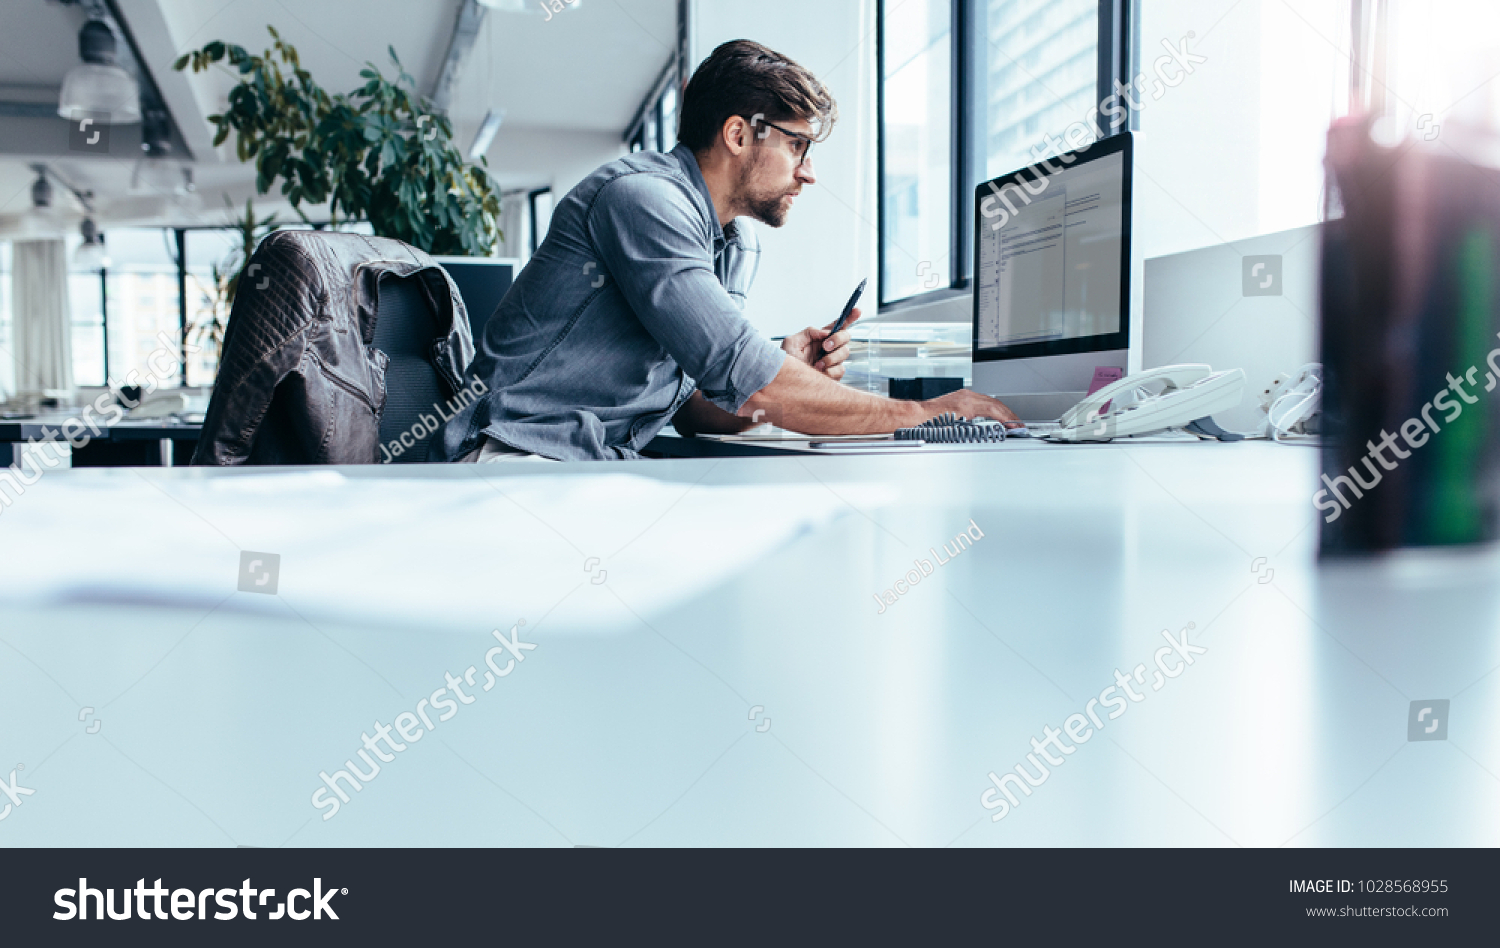 Young man sitting in office and working on desktop pc. Businessman looking at computer monitor while working in office. #1028568955